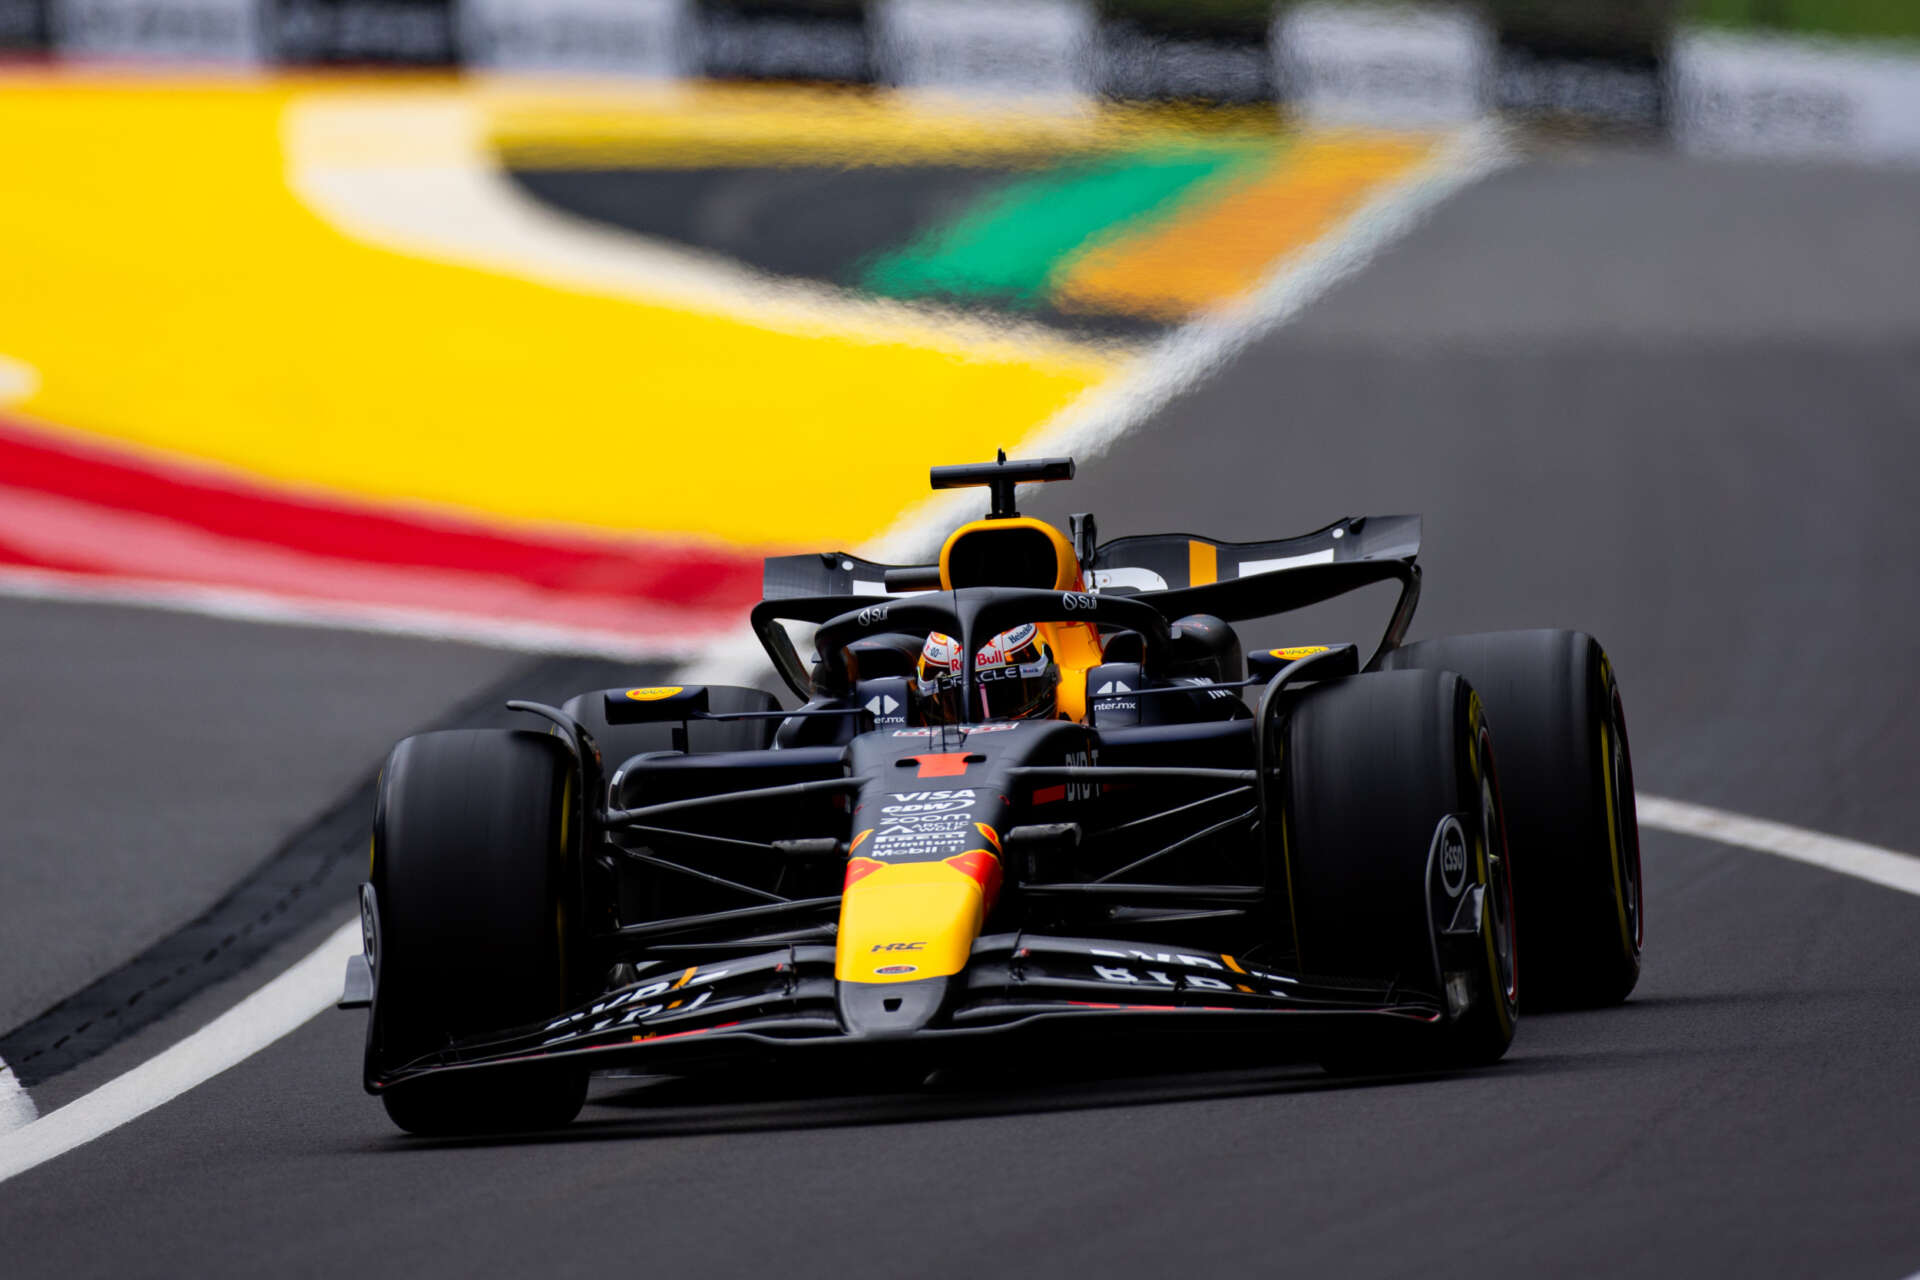 F1 News: Red Bull Hit With Unexpected Fines at Belgian Grand Prix